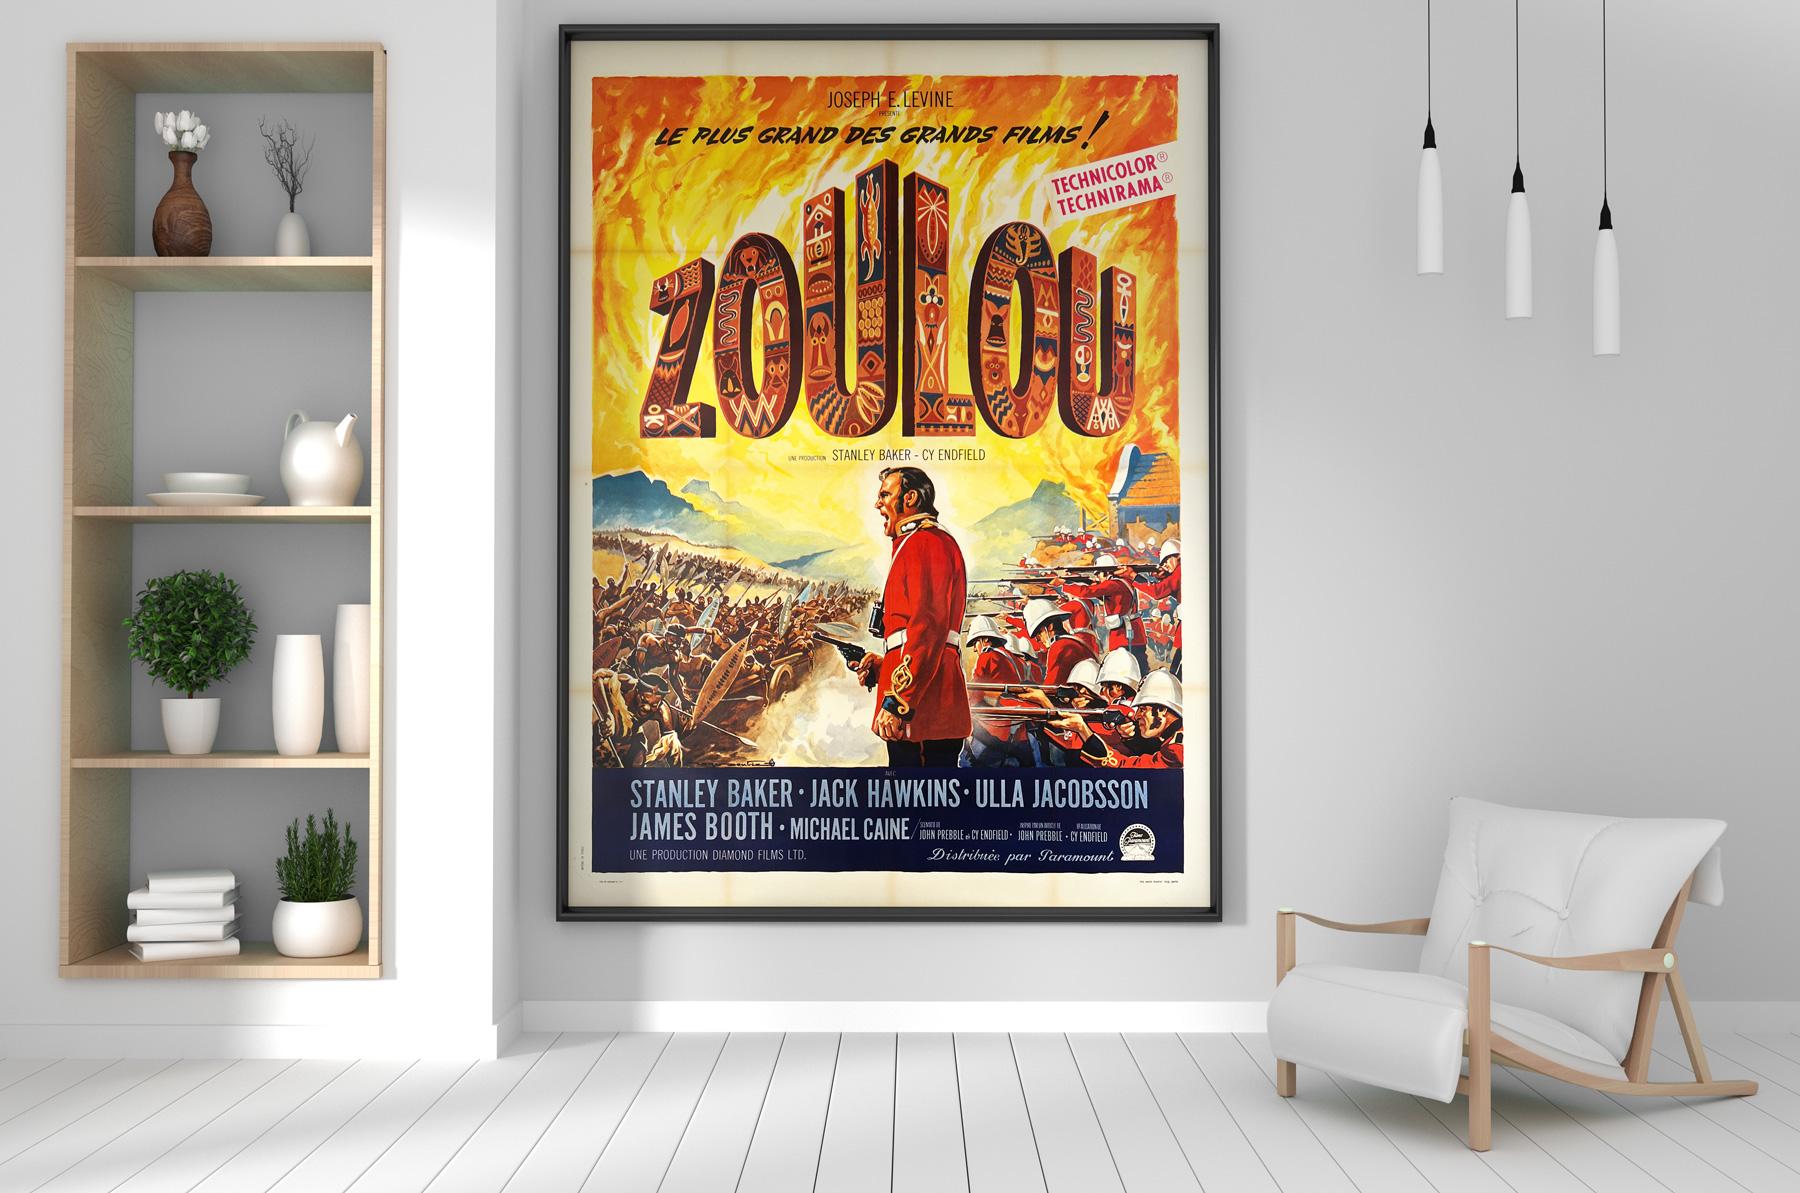 We adore the deep rich colours and demanding artwork on the French poster for classic Brit flick Zulu. One of the finest posters for the title and a real stand out in this large format!

This vintage poster is sized 47 x 63 inches (49 x 65 inches